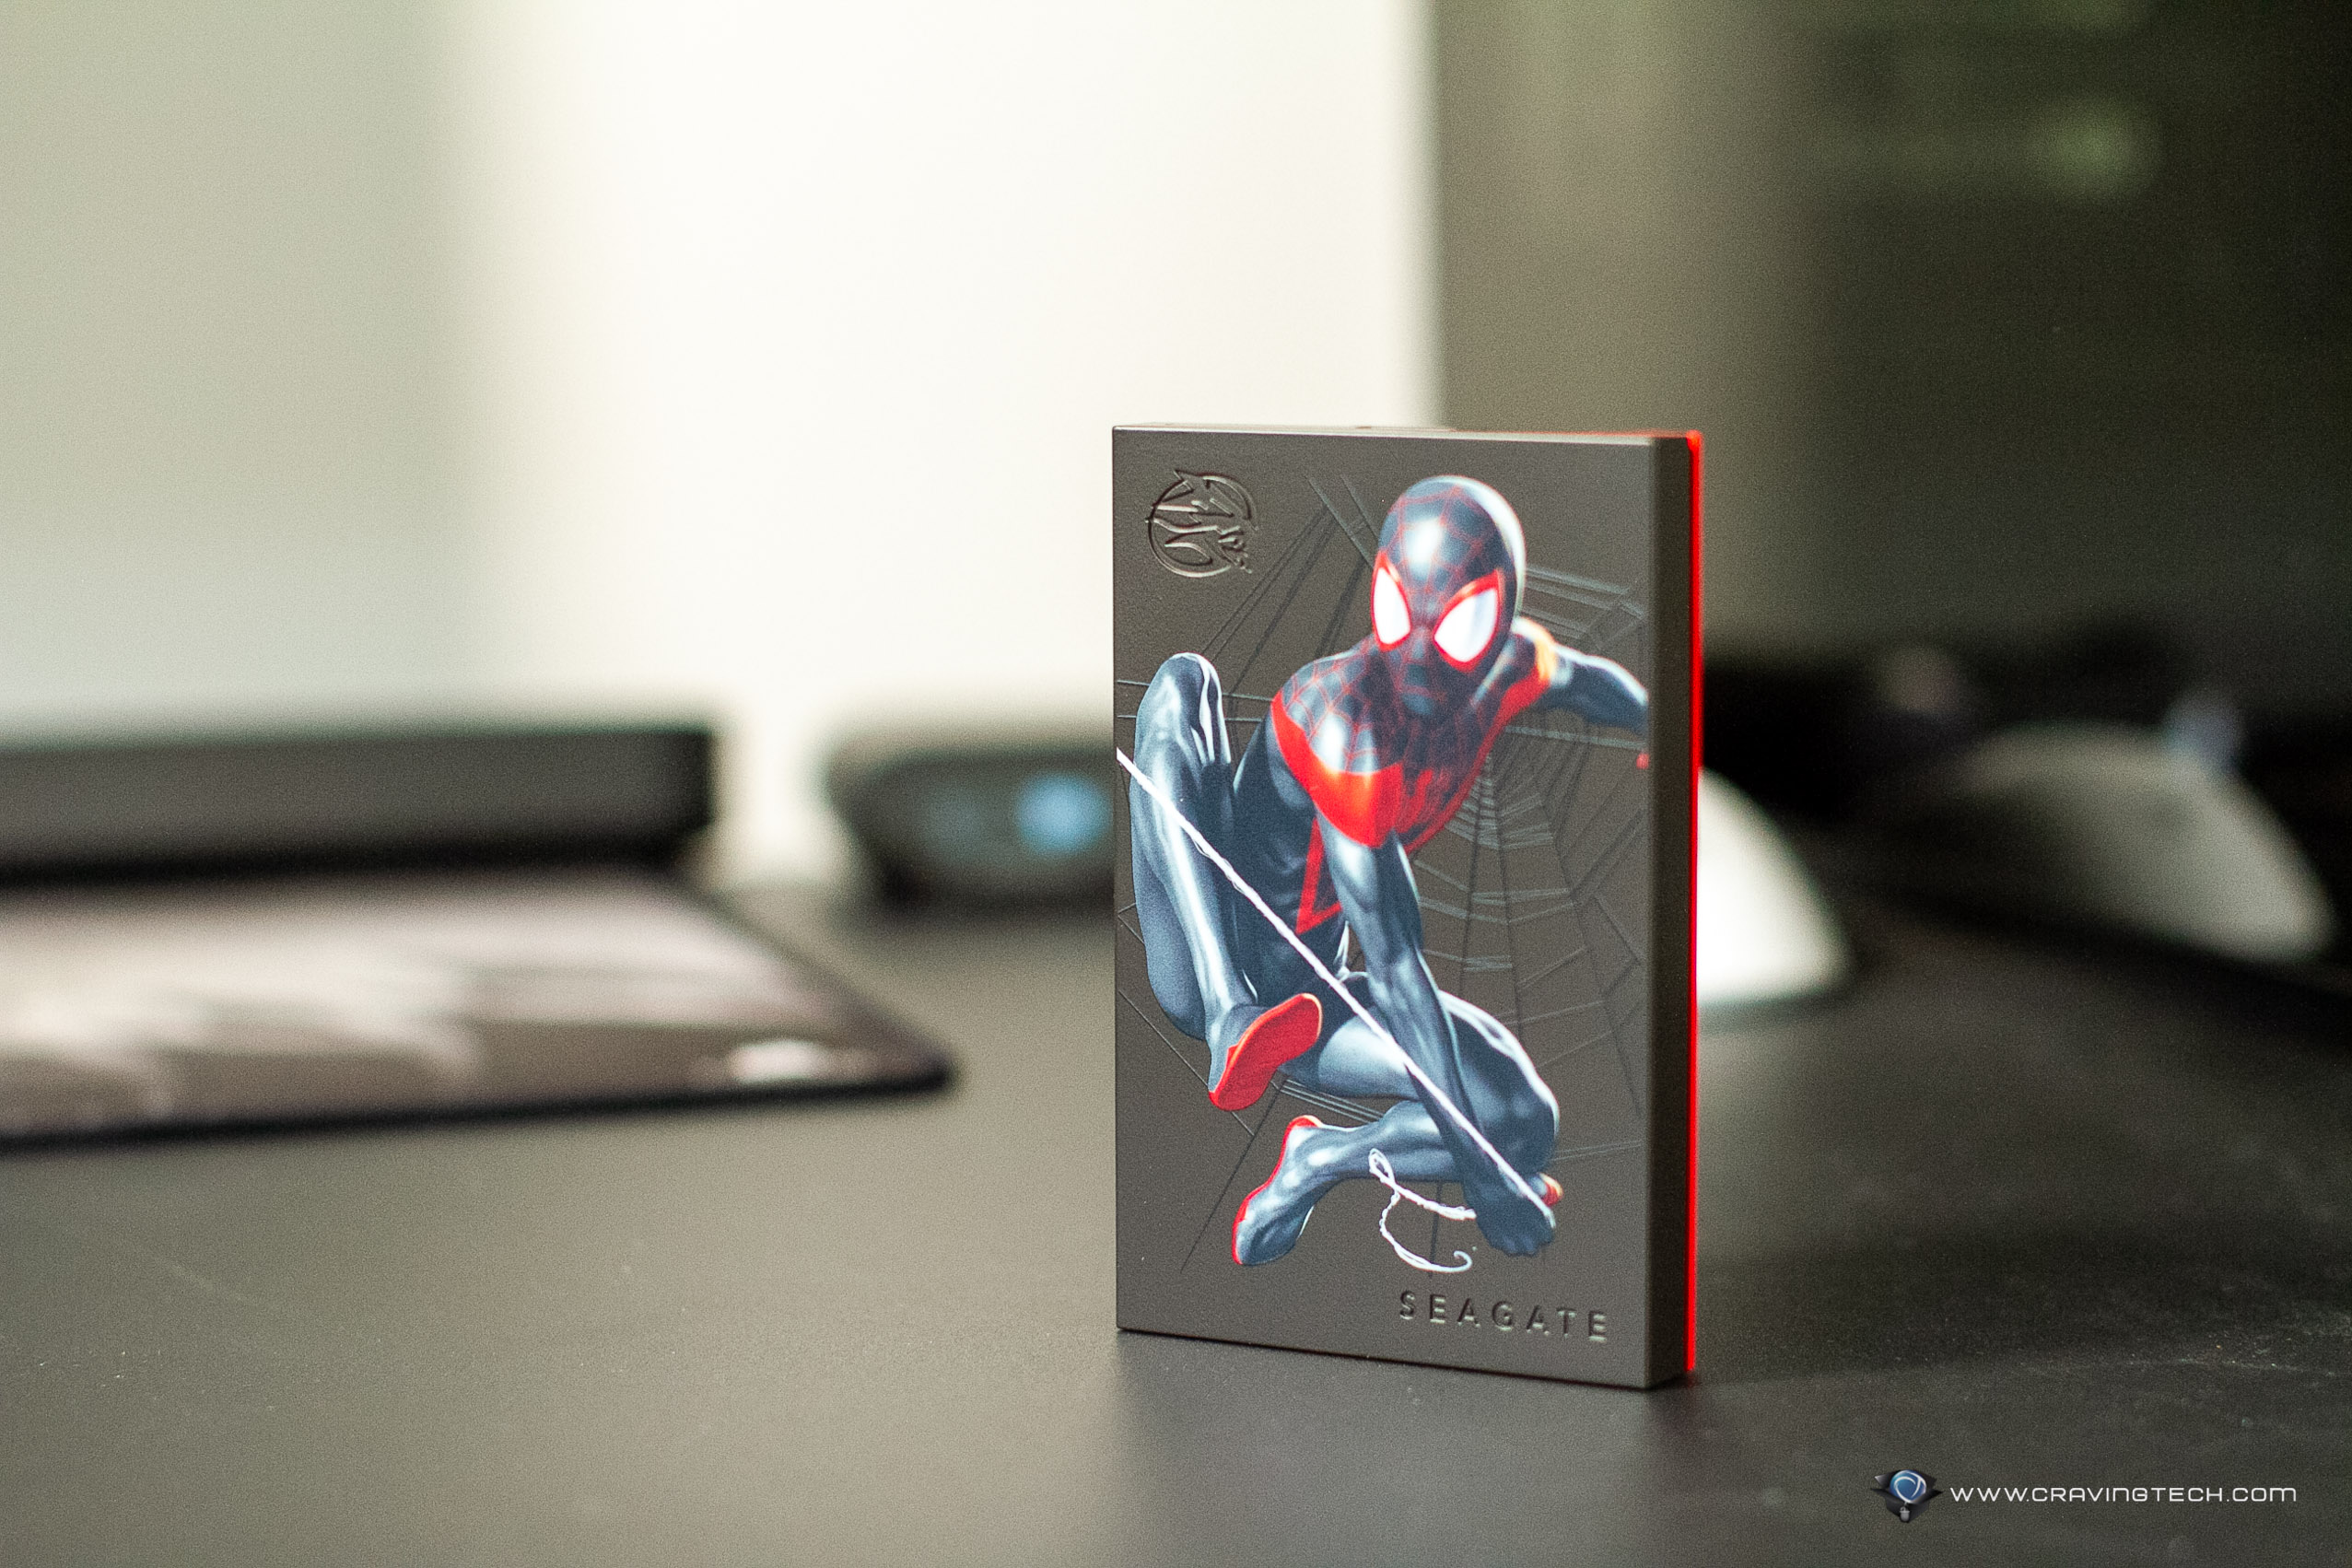 Marvel’s Limited Edition Spiderman Seagate Drive is here for Marvel fans